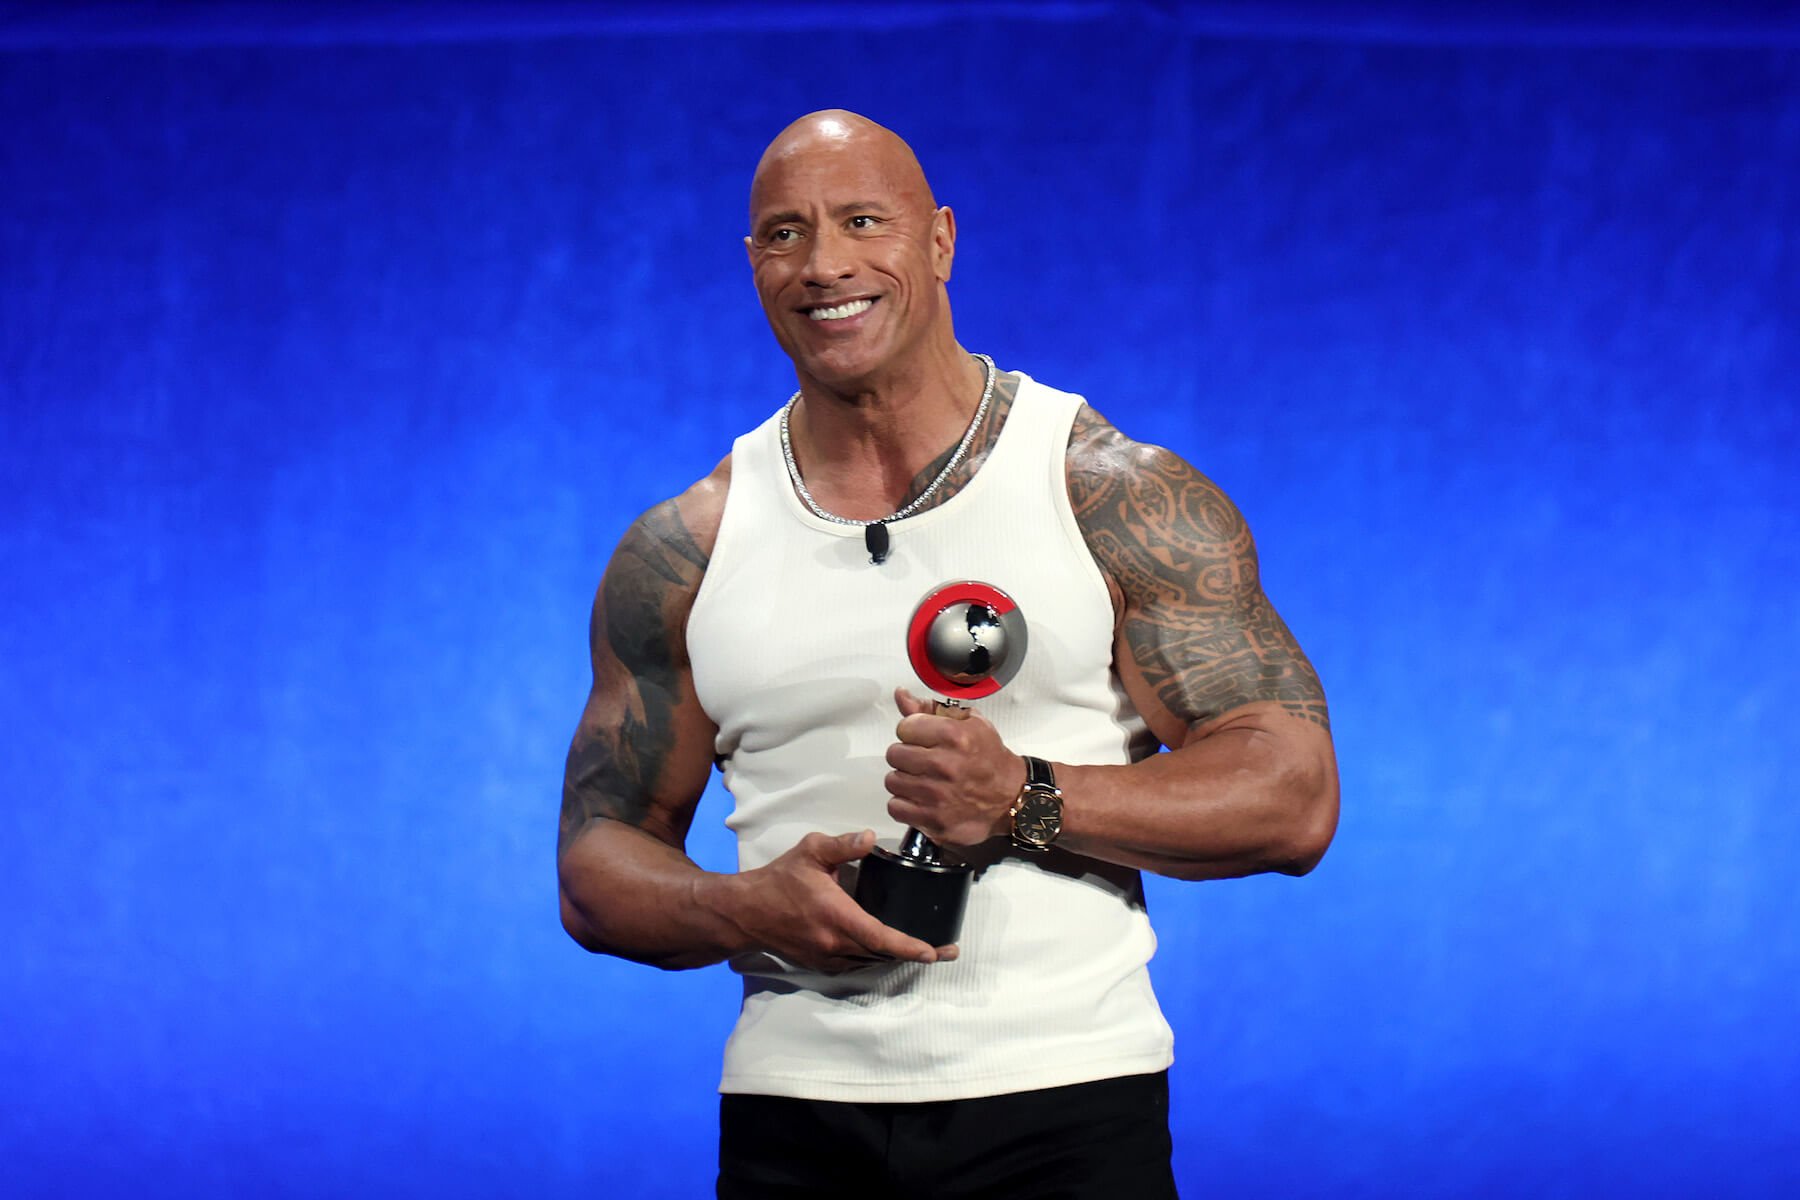 Dwayne 'The Rock' Johnson smiling while accepting an award against a blue background in 2024